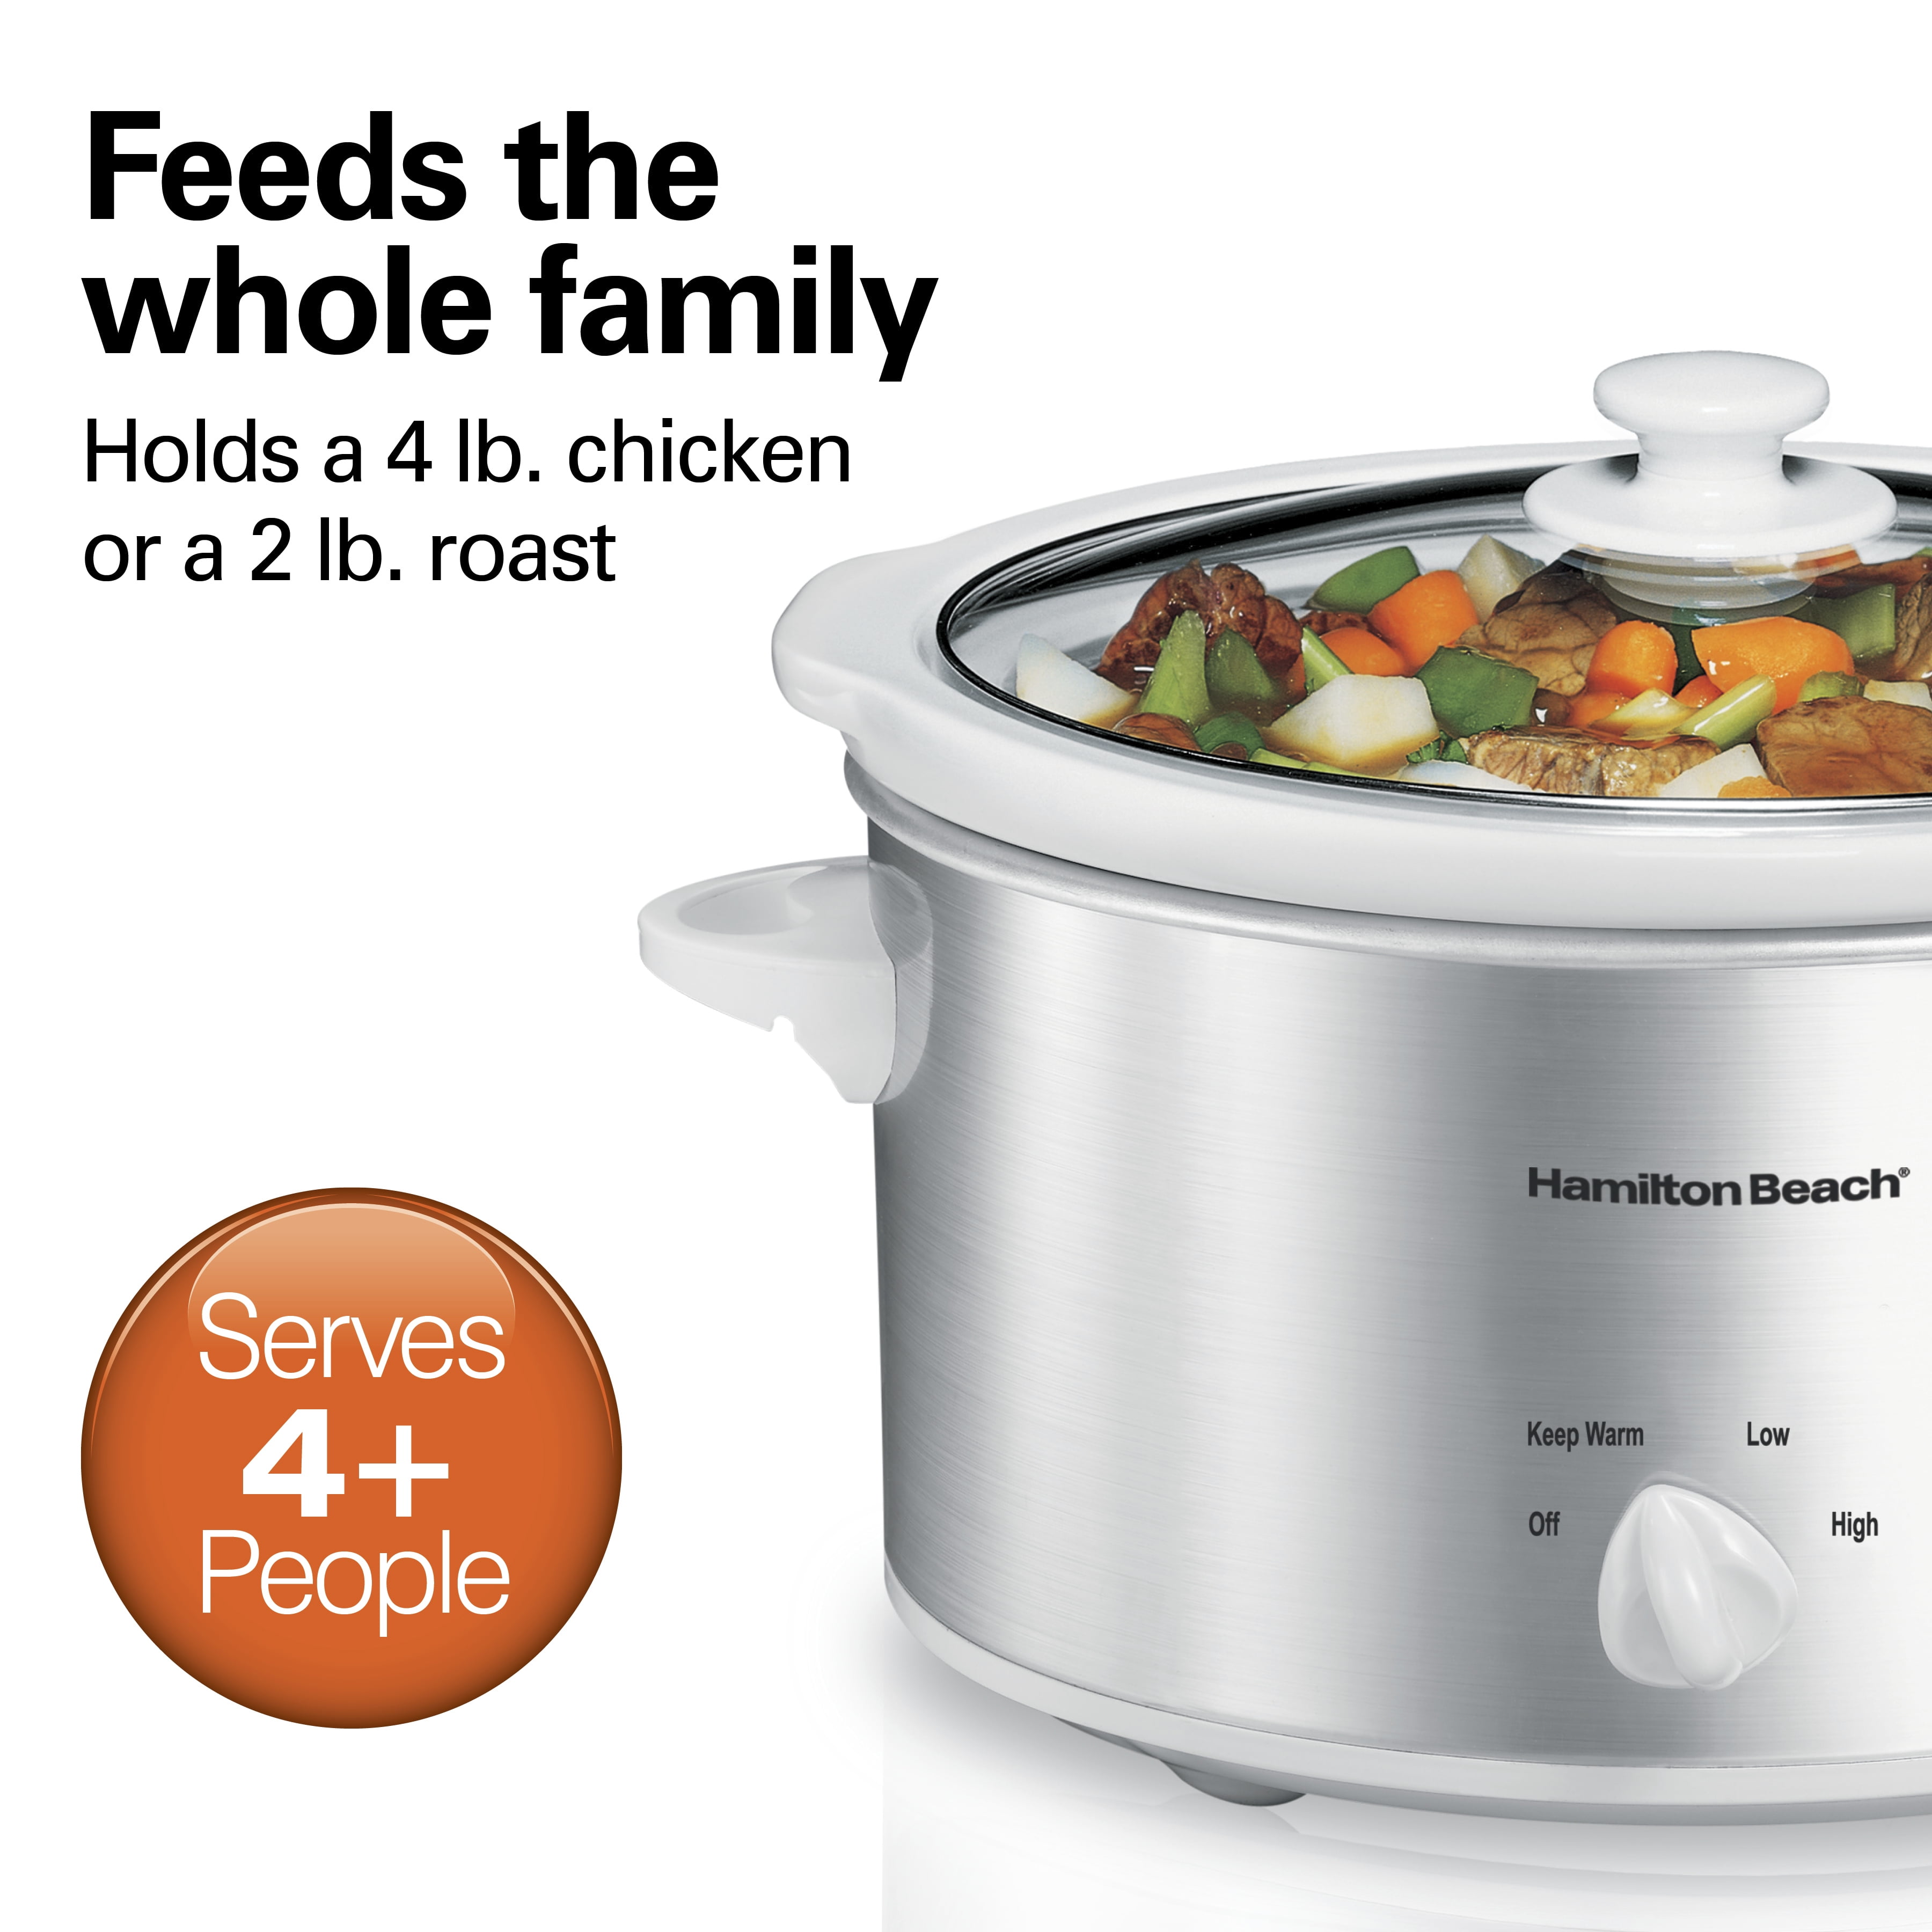 Hamilton Beach 4 Qt. Stainless Steel Slow Cooker with Built in Timer 33443  - The Home Depot